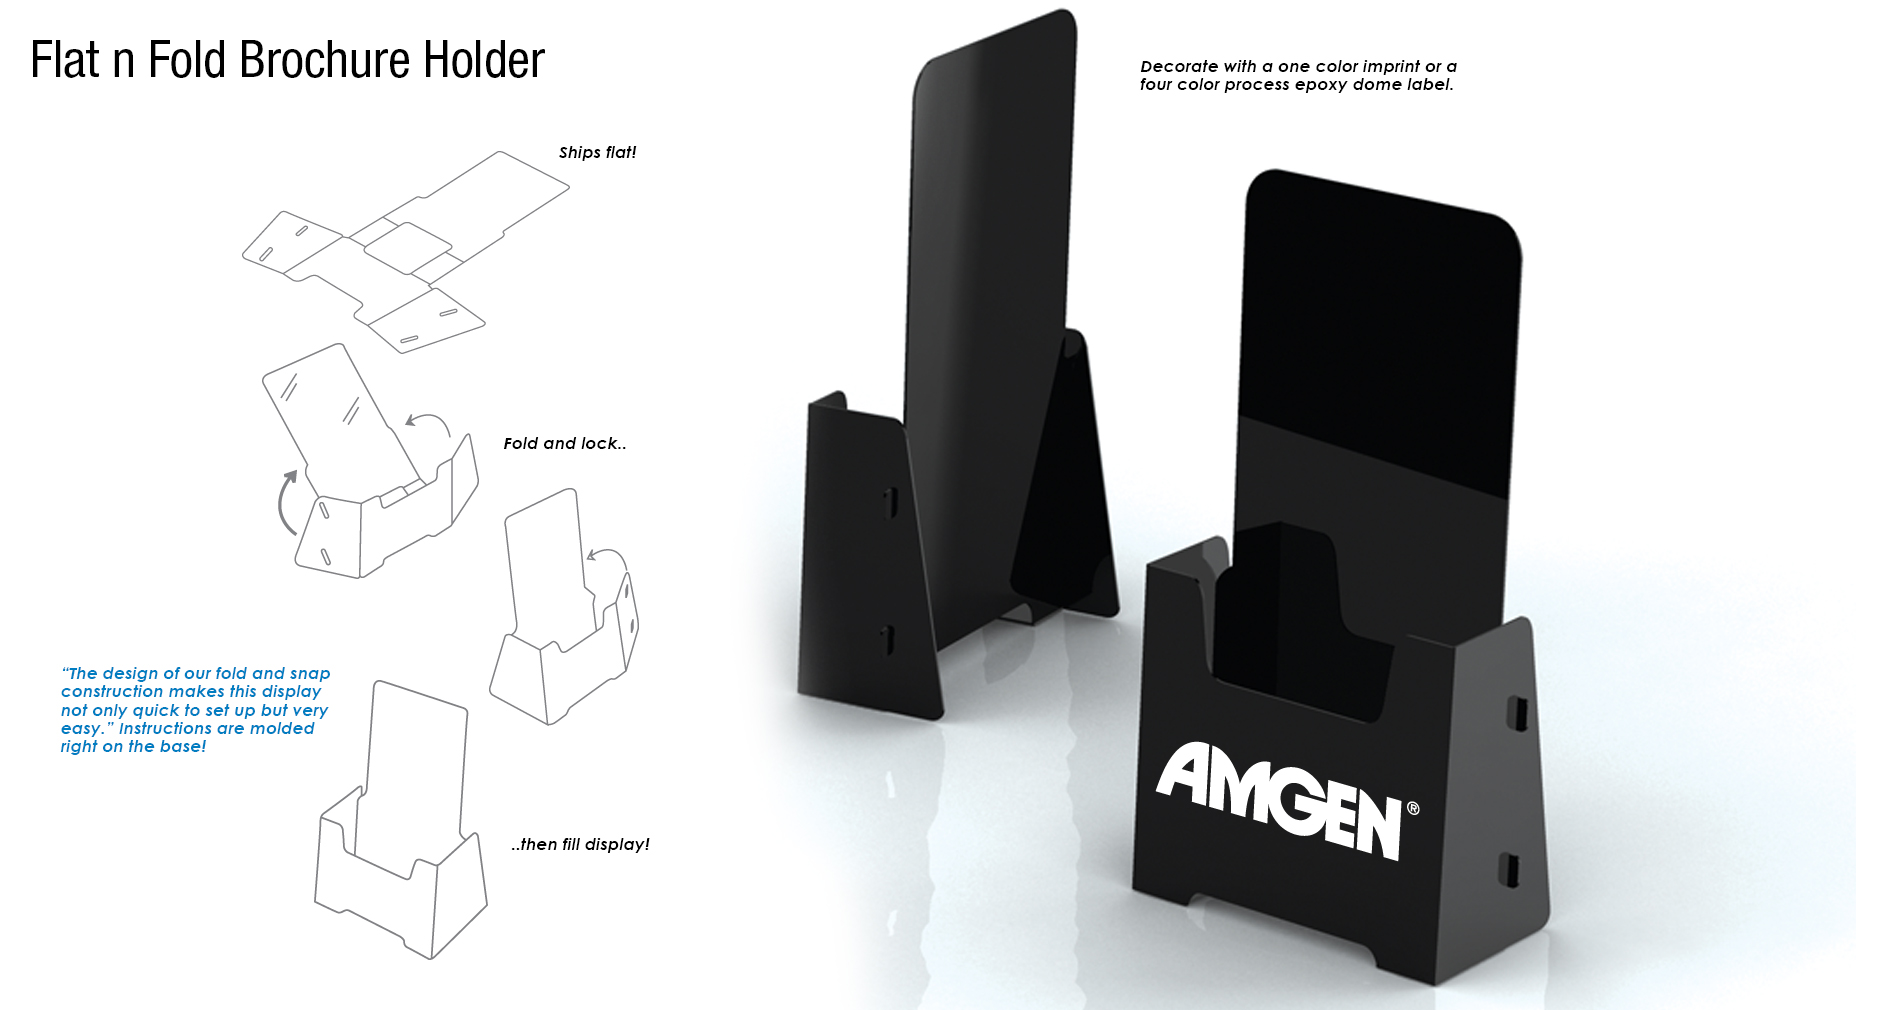 Flat and fold molded brochures holder